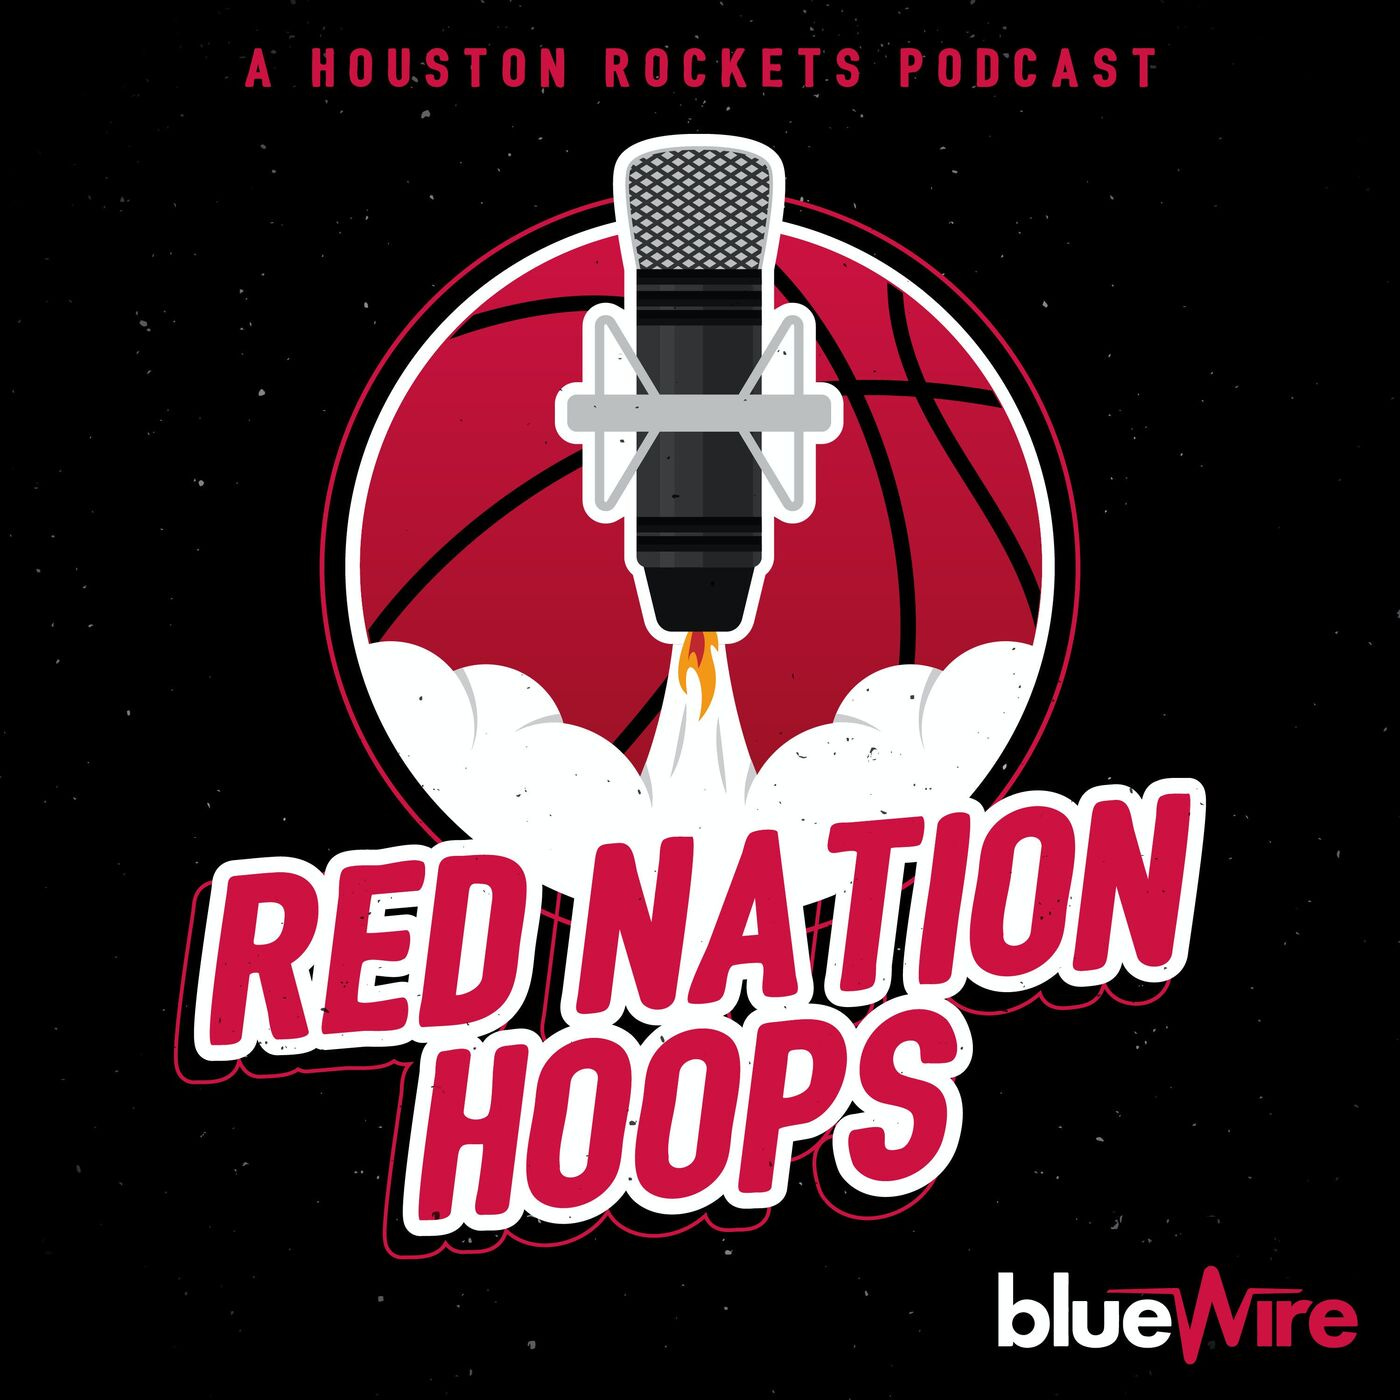 Ep. 132: Are the 2019-20 Houston Rockets a title contender?